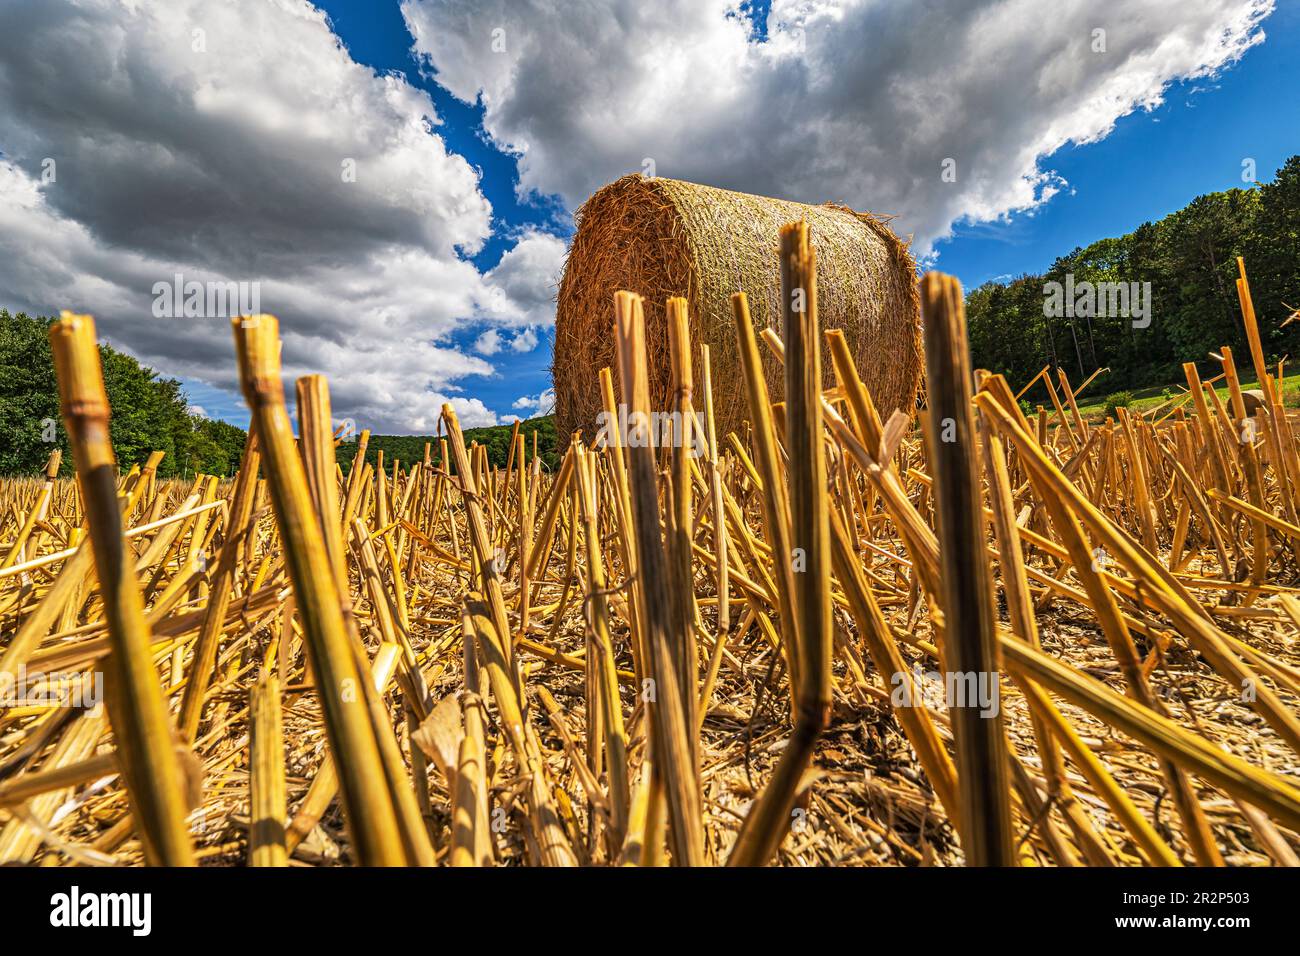 ground wide angle shot of a stubble field with many straw rolls under blue cloudy sky Stock Photo